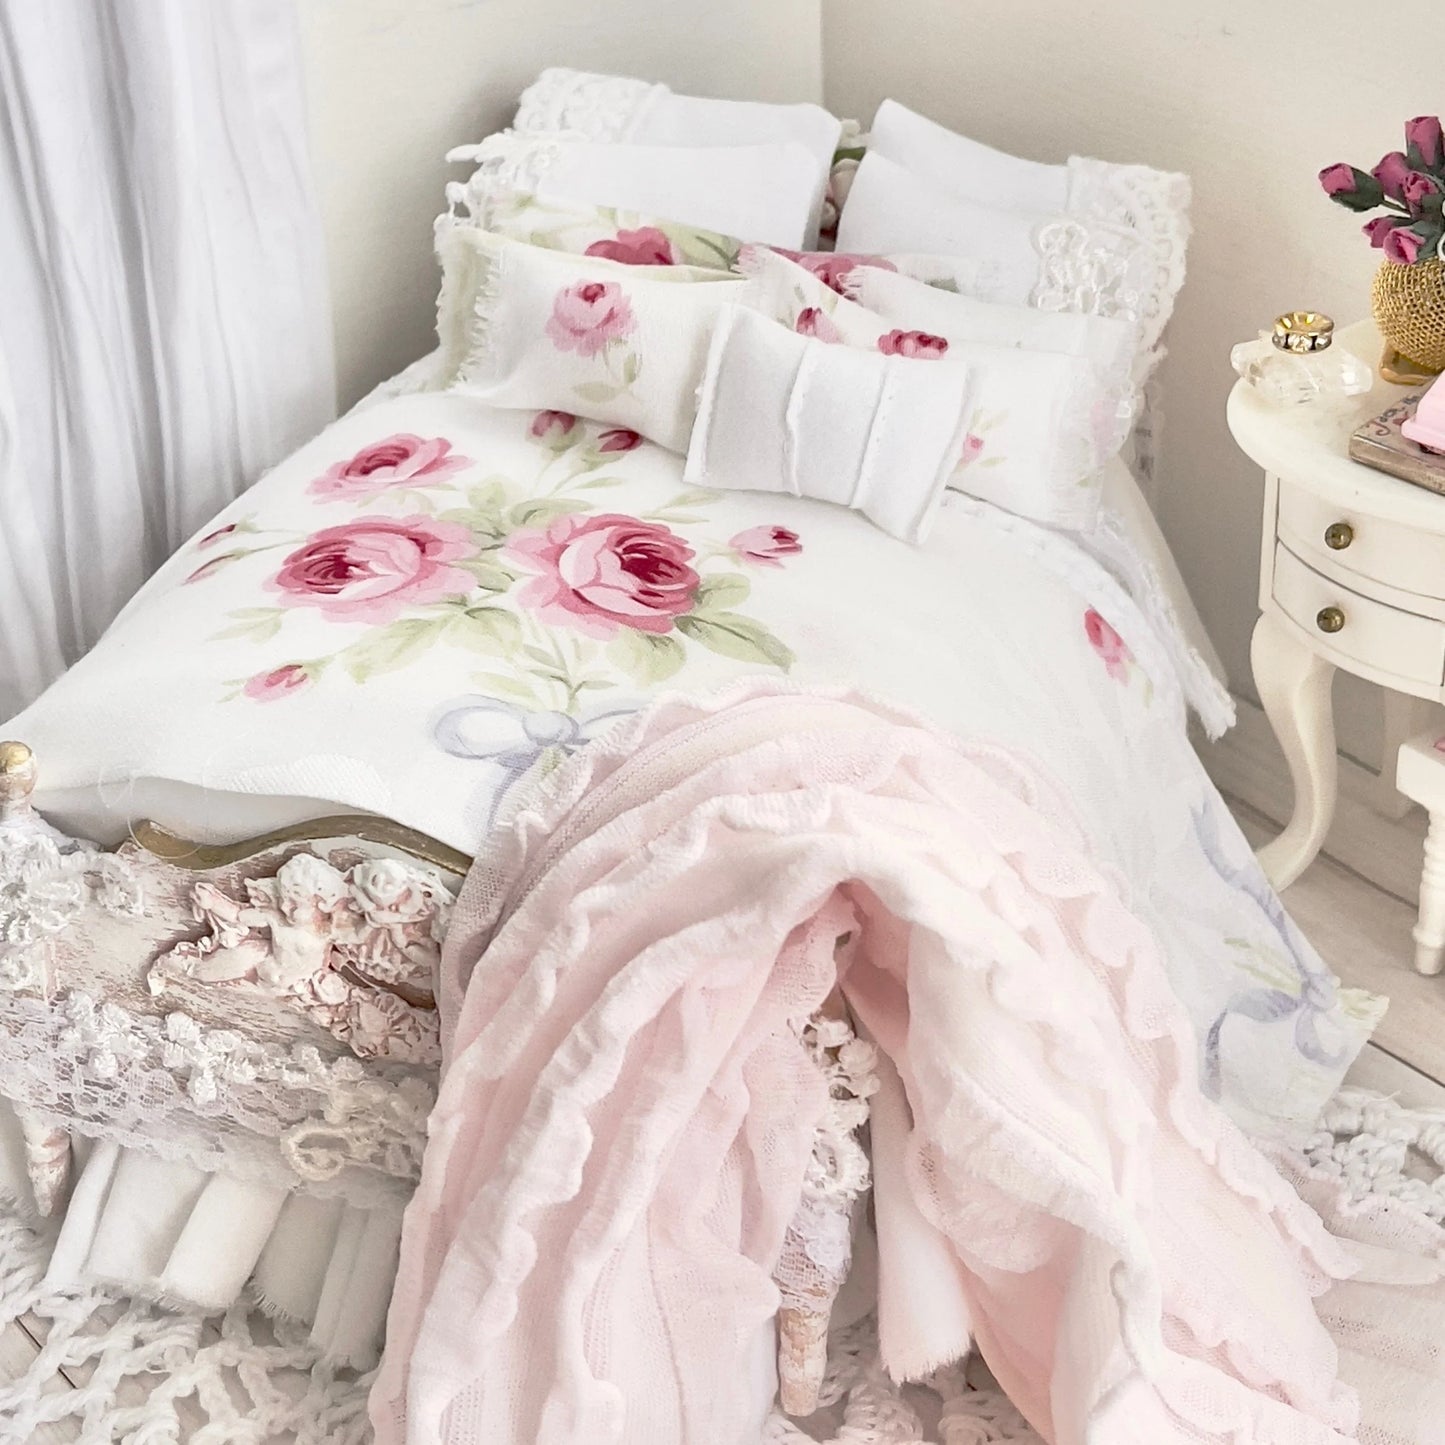 Chantallena Doll House Dressed Bed | Fifteen Piece White Cotton with Grand Pink Roses, Lace Accents, Ruffled Knit Throw | Grand Roses